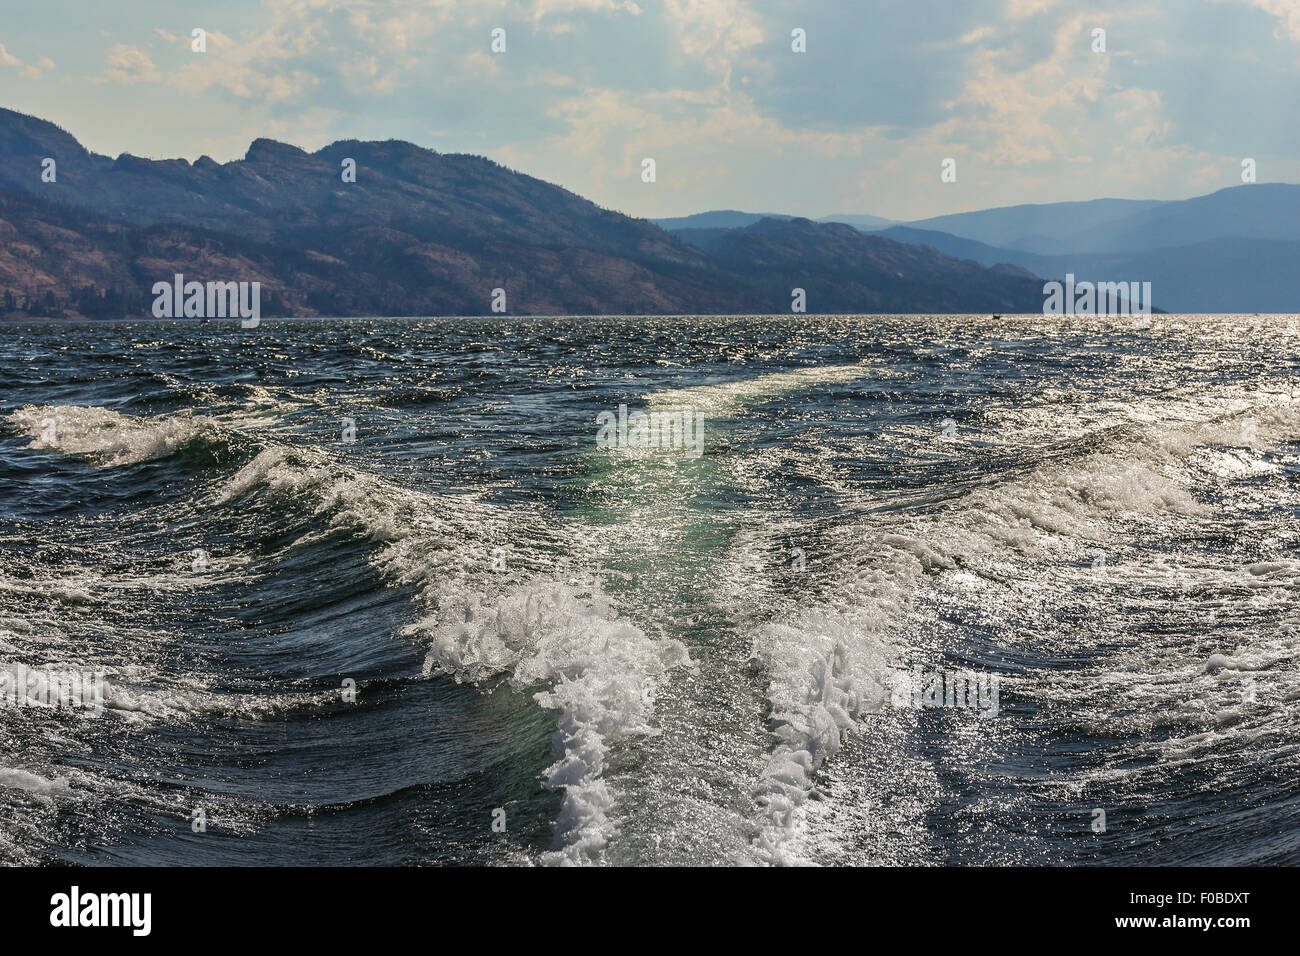 Okanagan Lake, Kelowna, Canada - taken from the back of a speed boat with the beautiful Okanagan valley in the background. Stock Photo